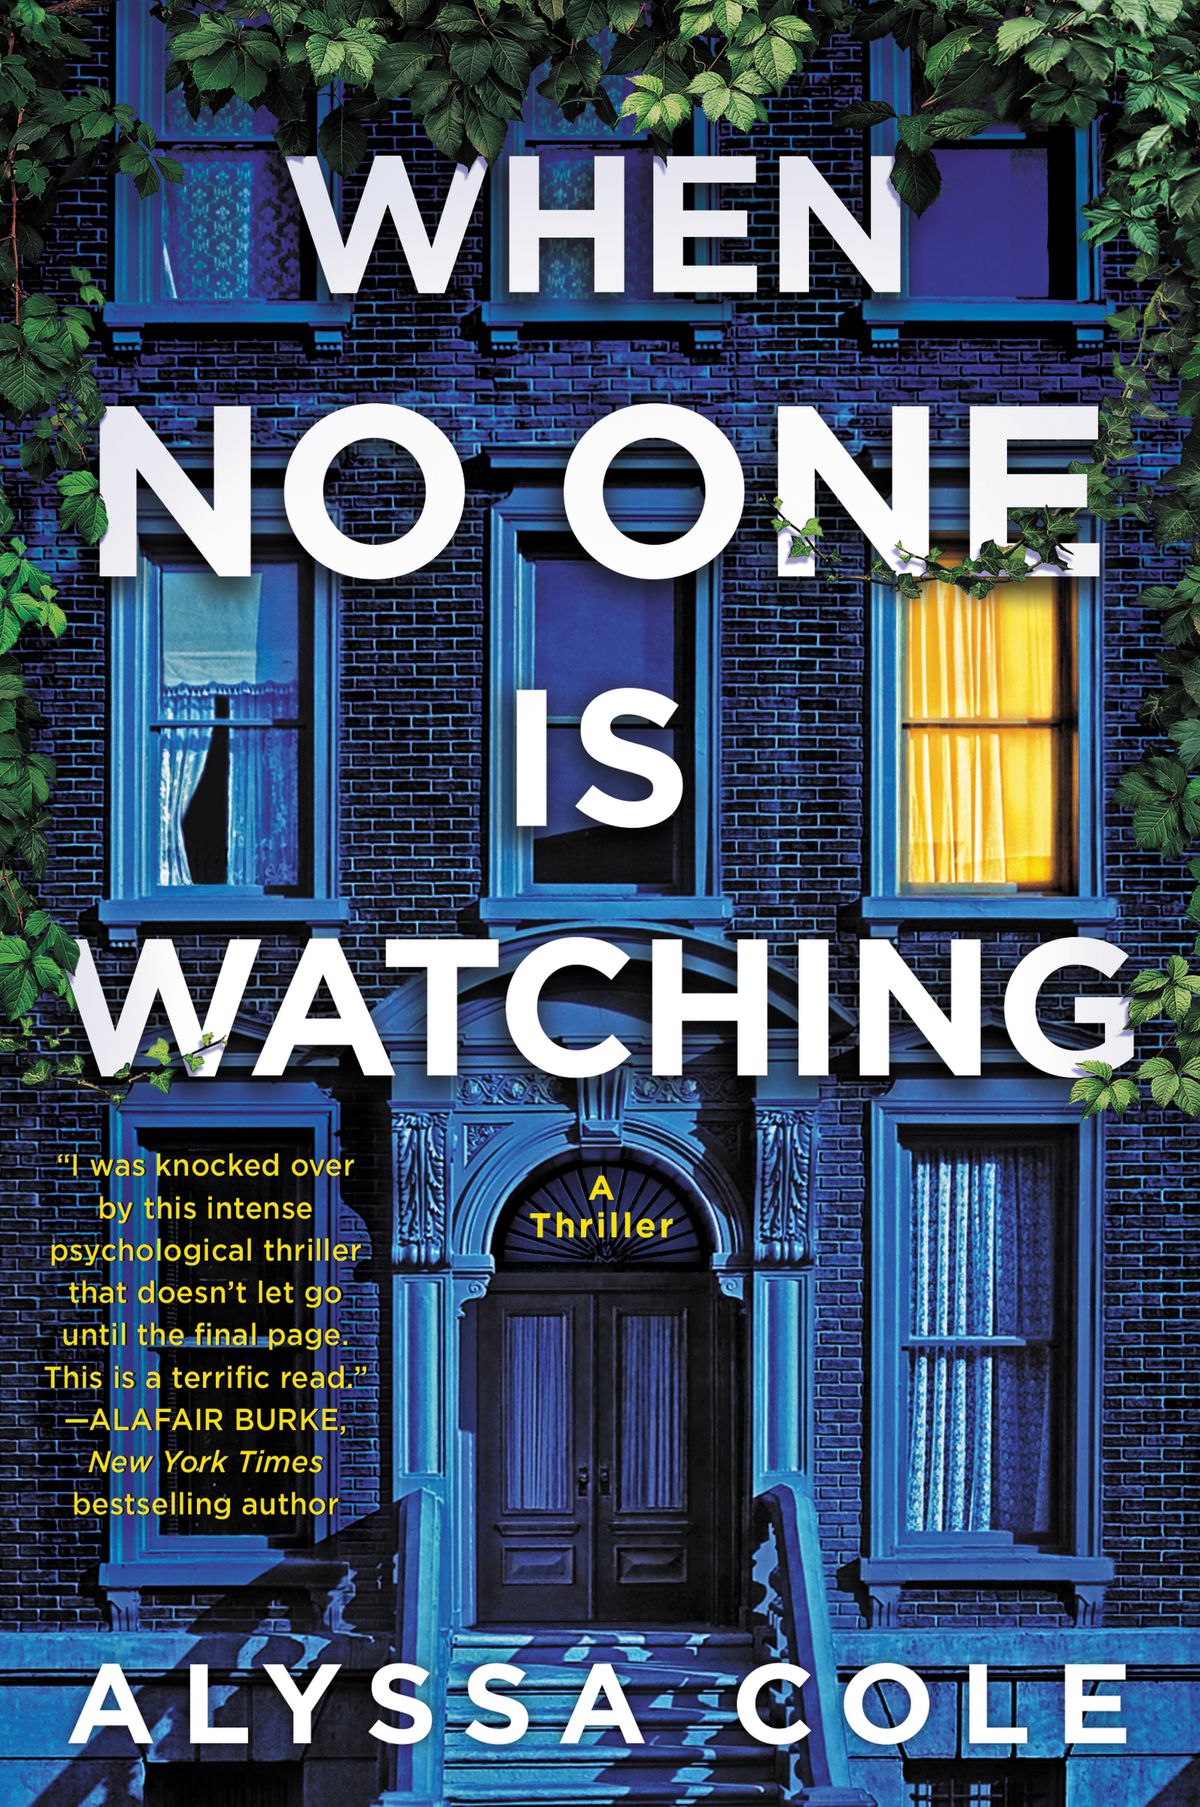 When No One is Watching by Alyssa Cole